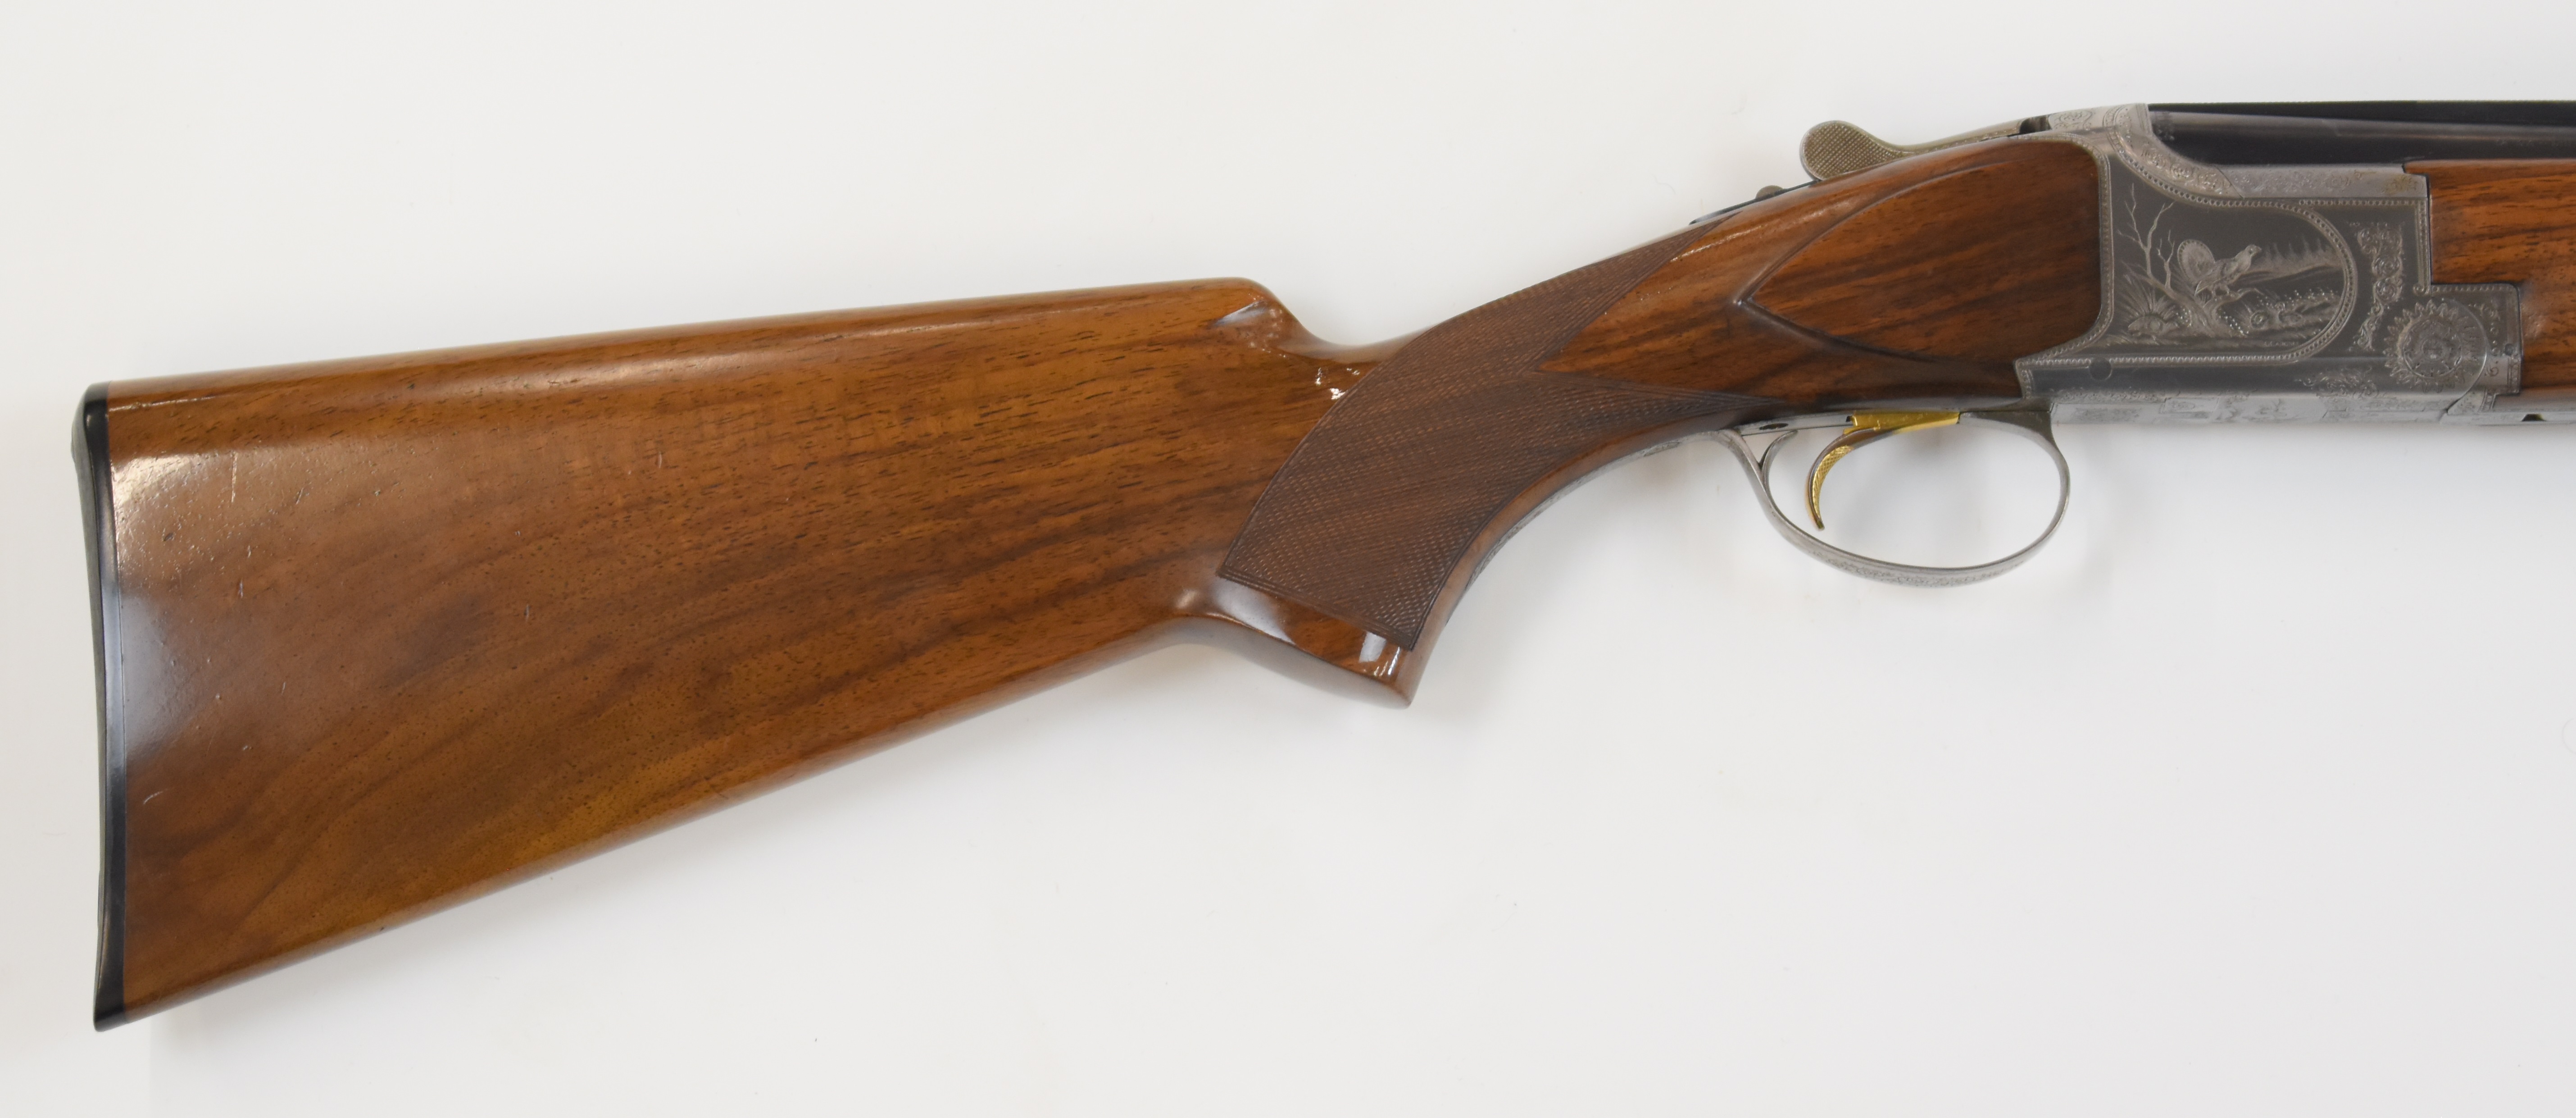 Browning B2 12 bore over and under shotgun with engraved scenes of birds to the locks and underside, - Image 3 of 12